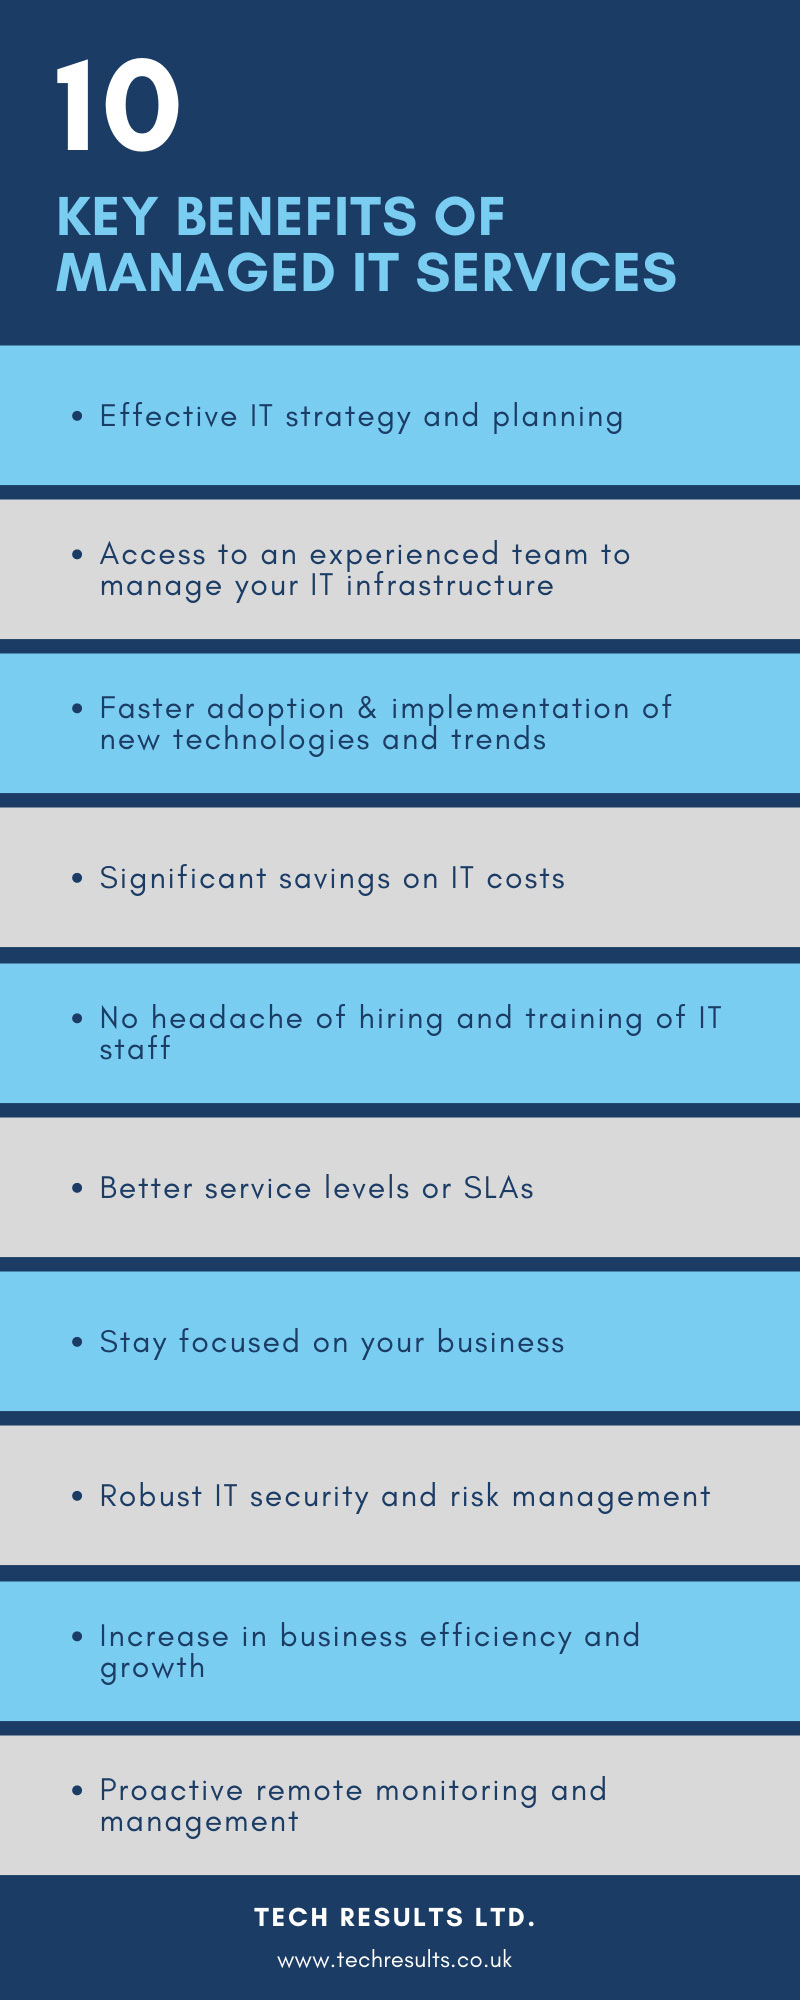 managed it services benefits infographic